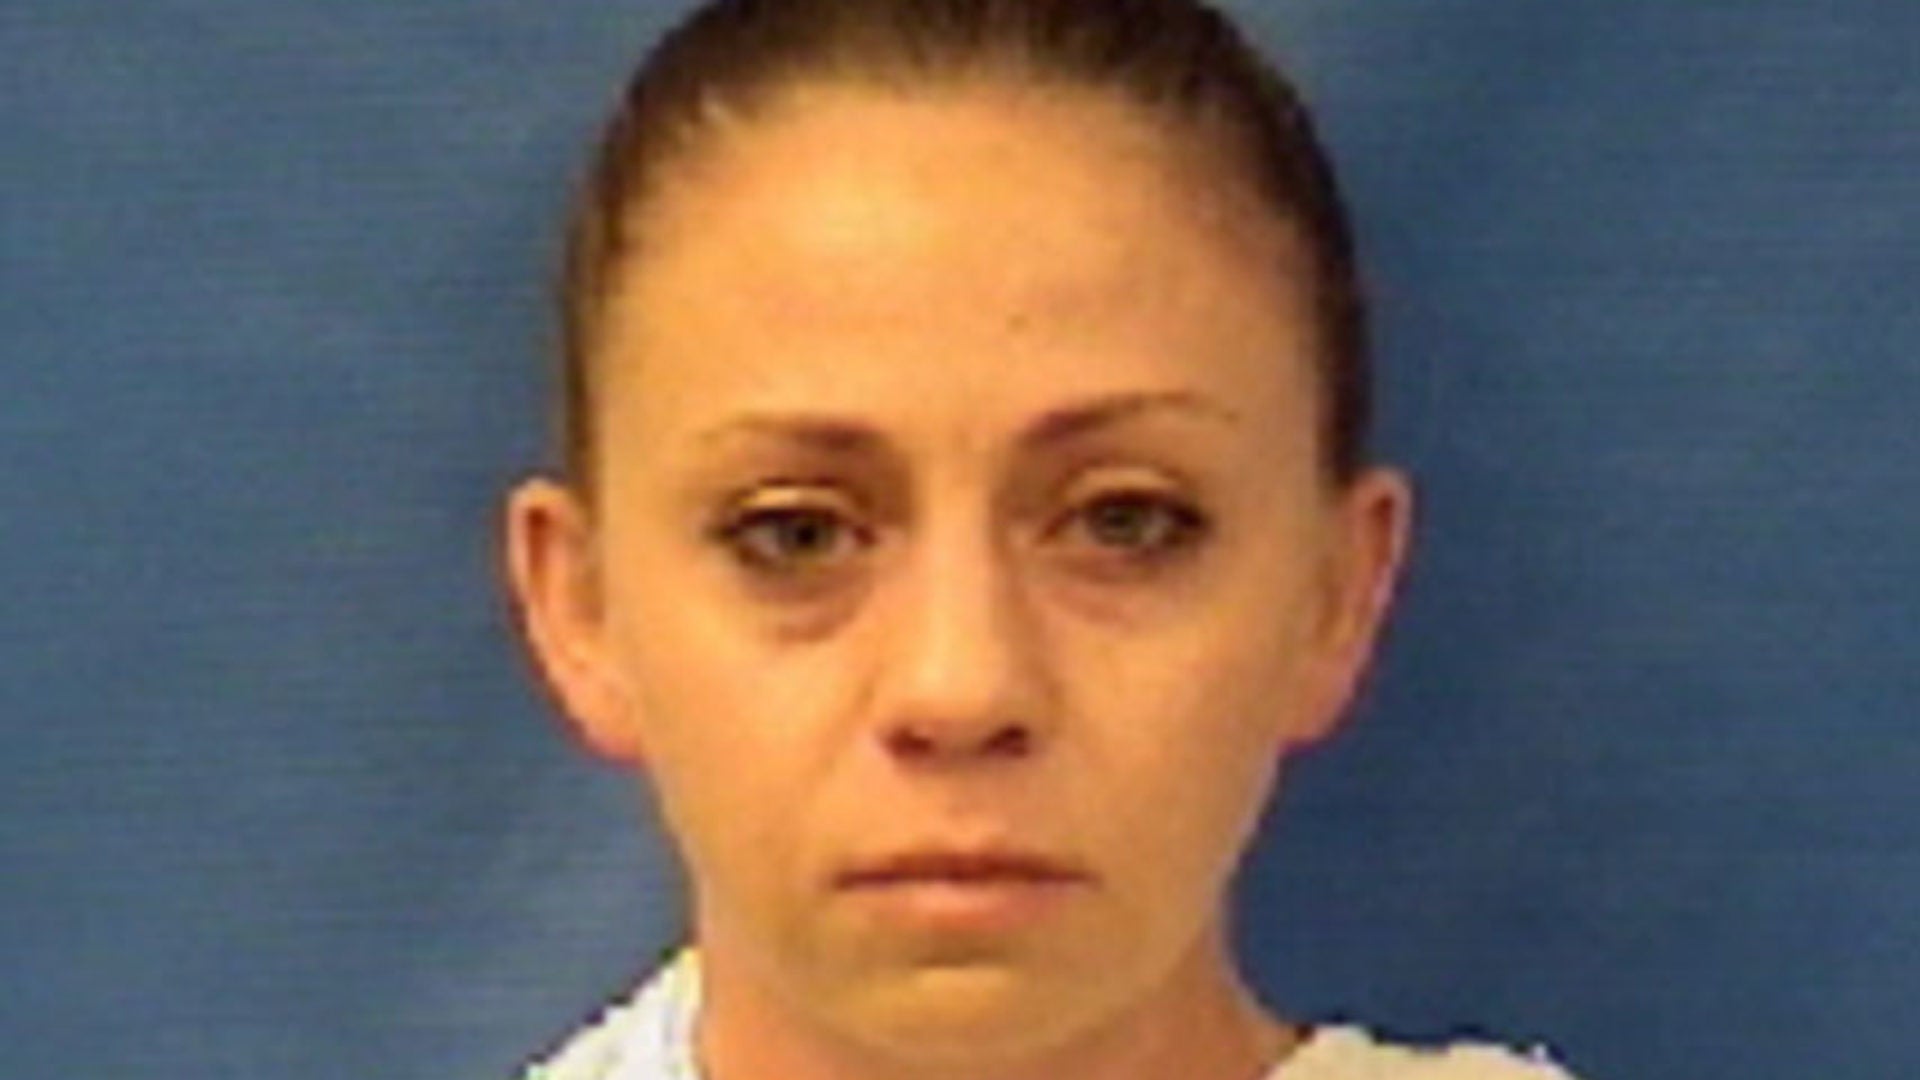 Judge Blocks Lead Investigator's Testimony That Amber Guyger Acted Reasonably In Shooting